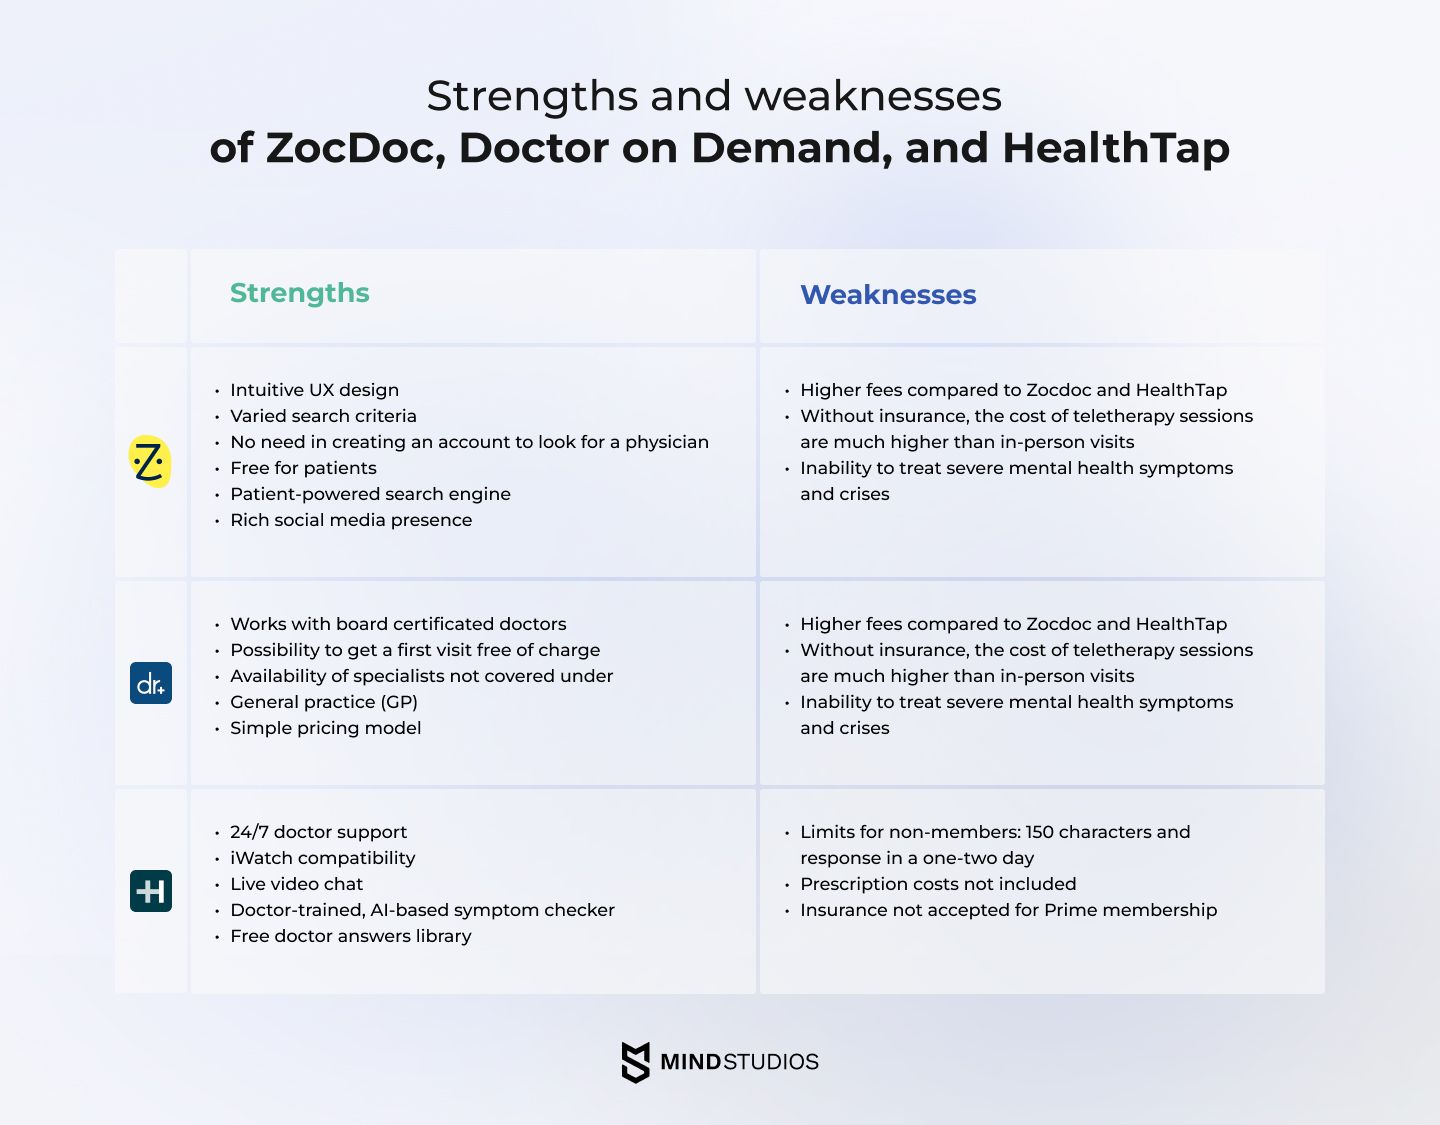 Strengths and weaknesses of ZocDoc, Doctor on Demand, and HealthTap